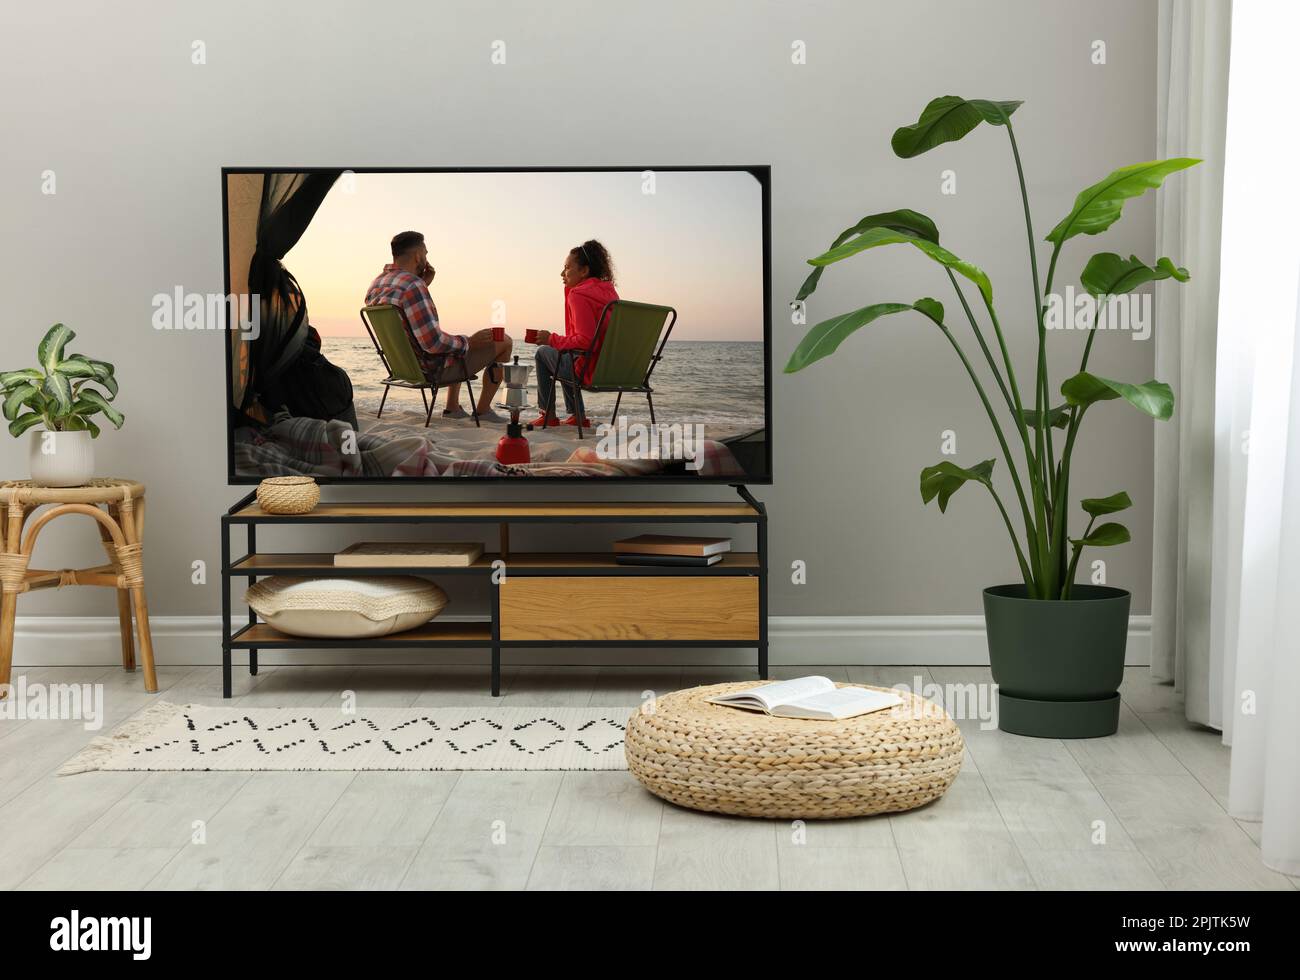 Modern TV set on wooden stand in room. Scene of romantic movie on screen Stock Photo